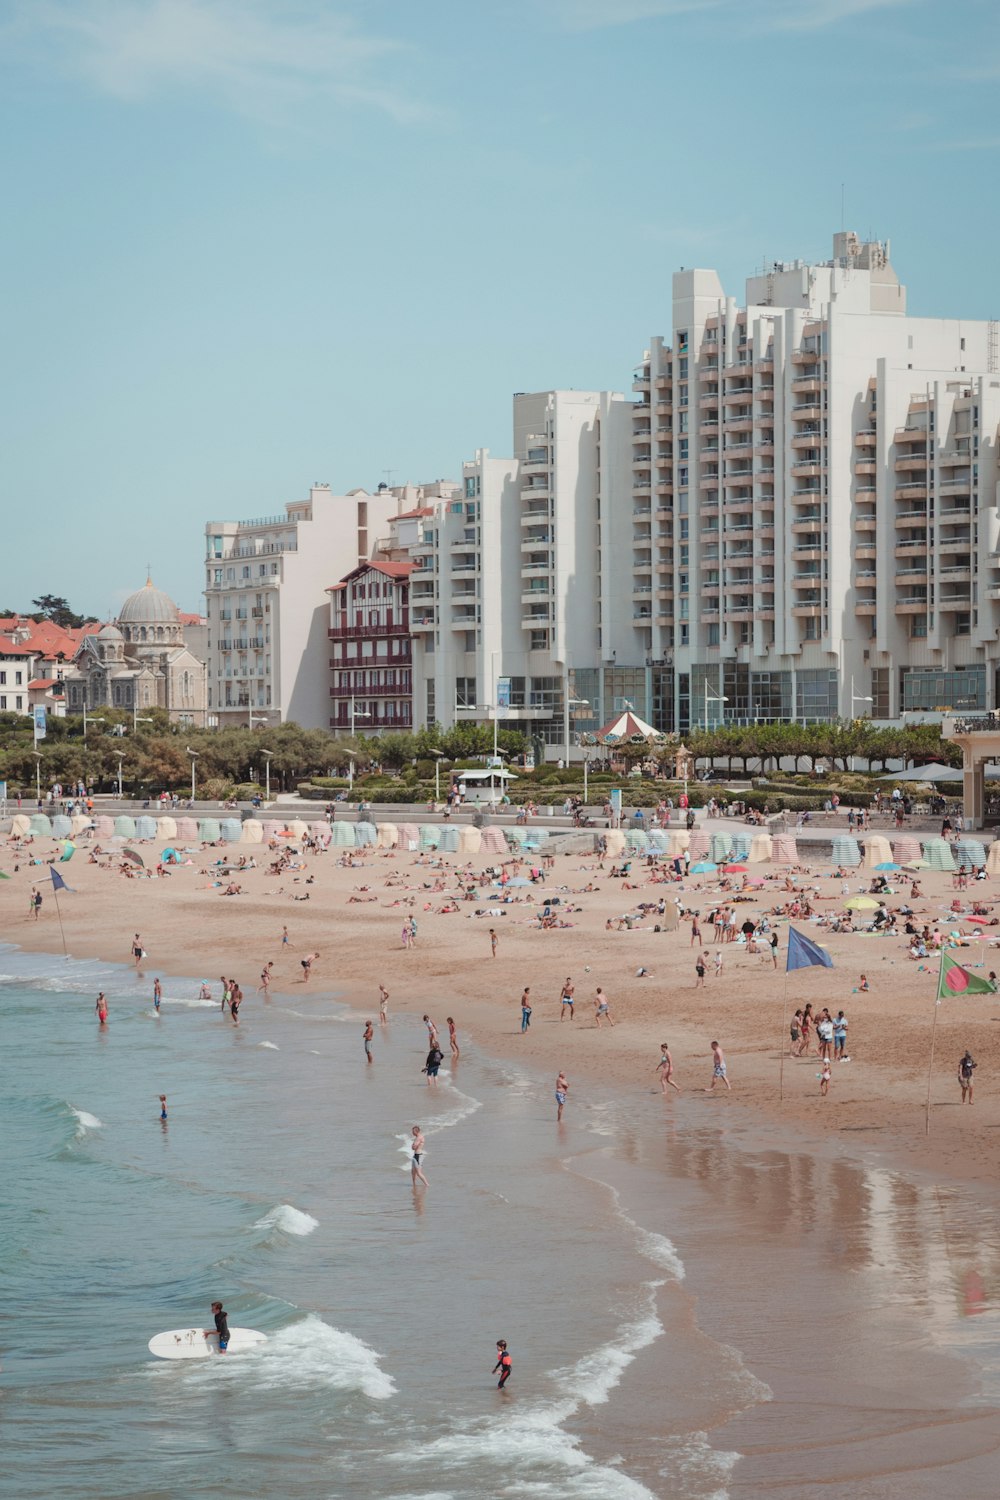 a beach with many people on it and buildings in the background